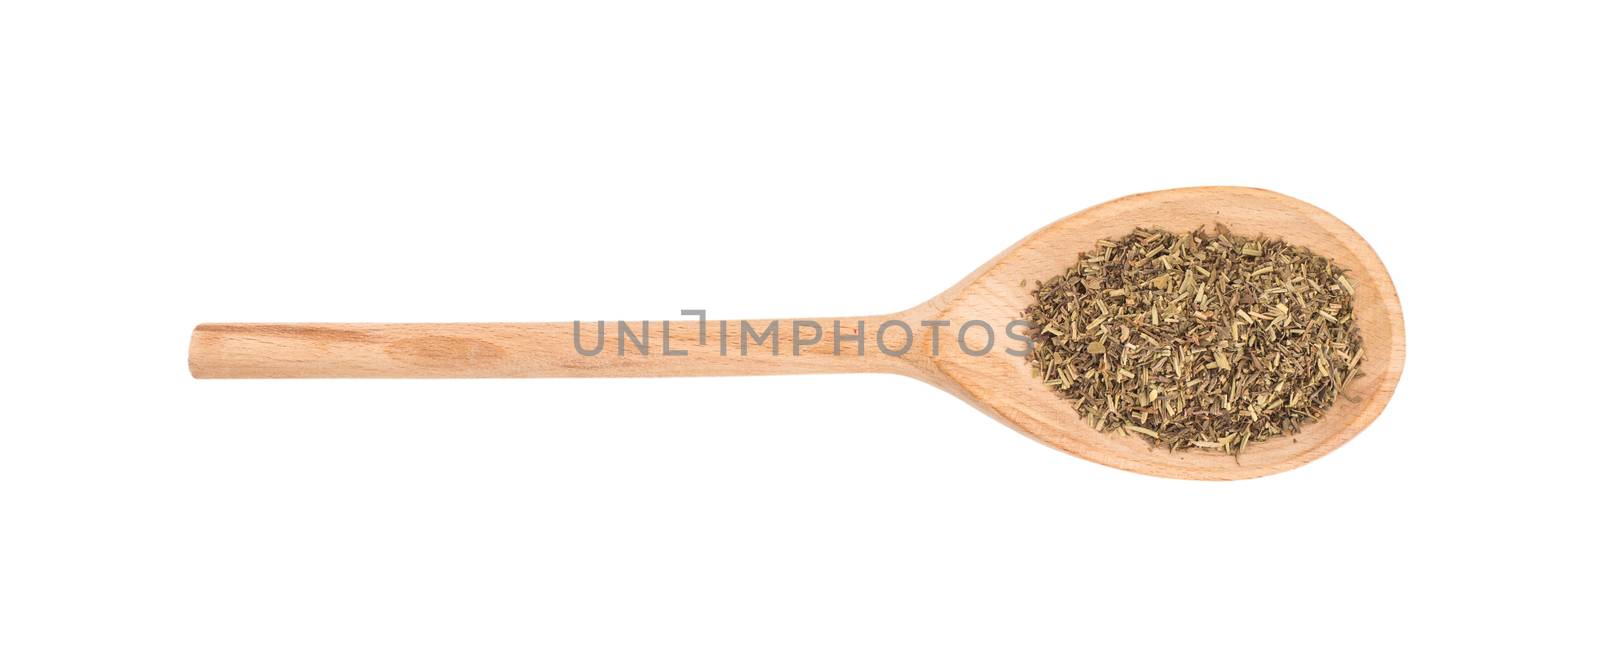 Provence herbs in a wooden spoon on a white background by DGolbay